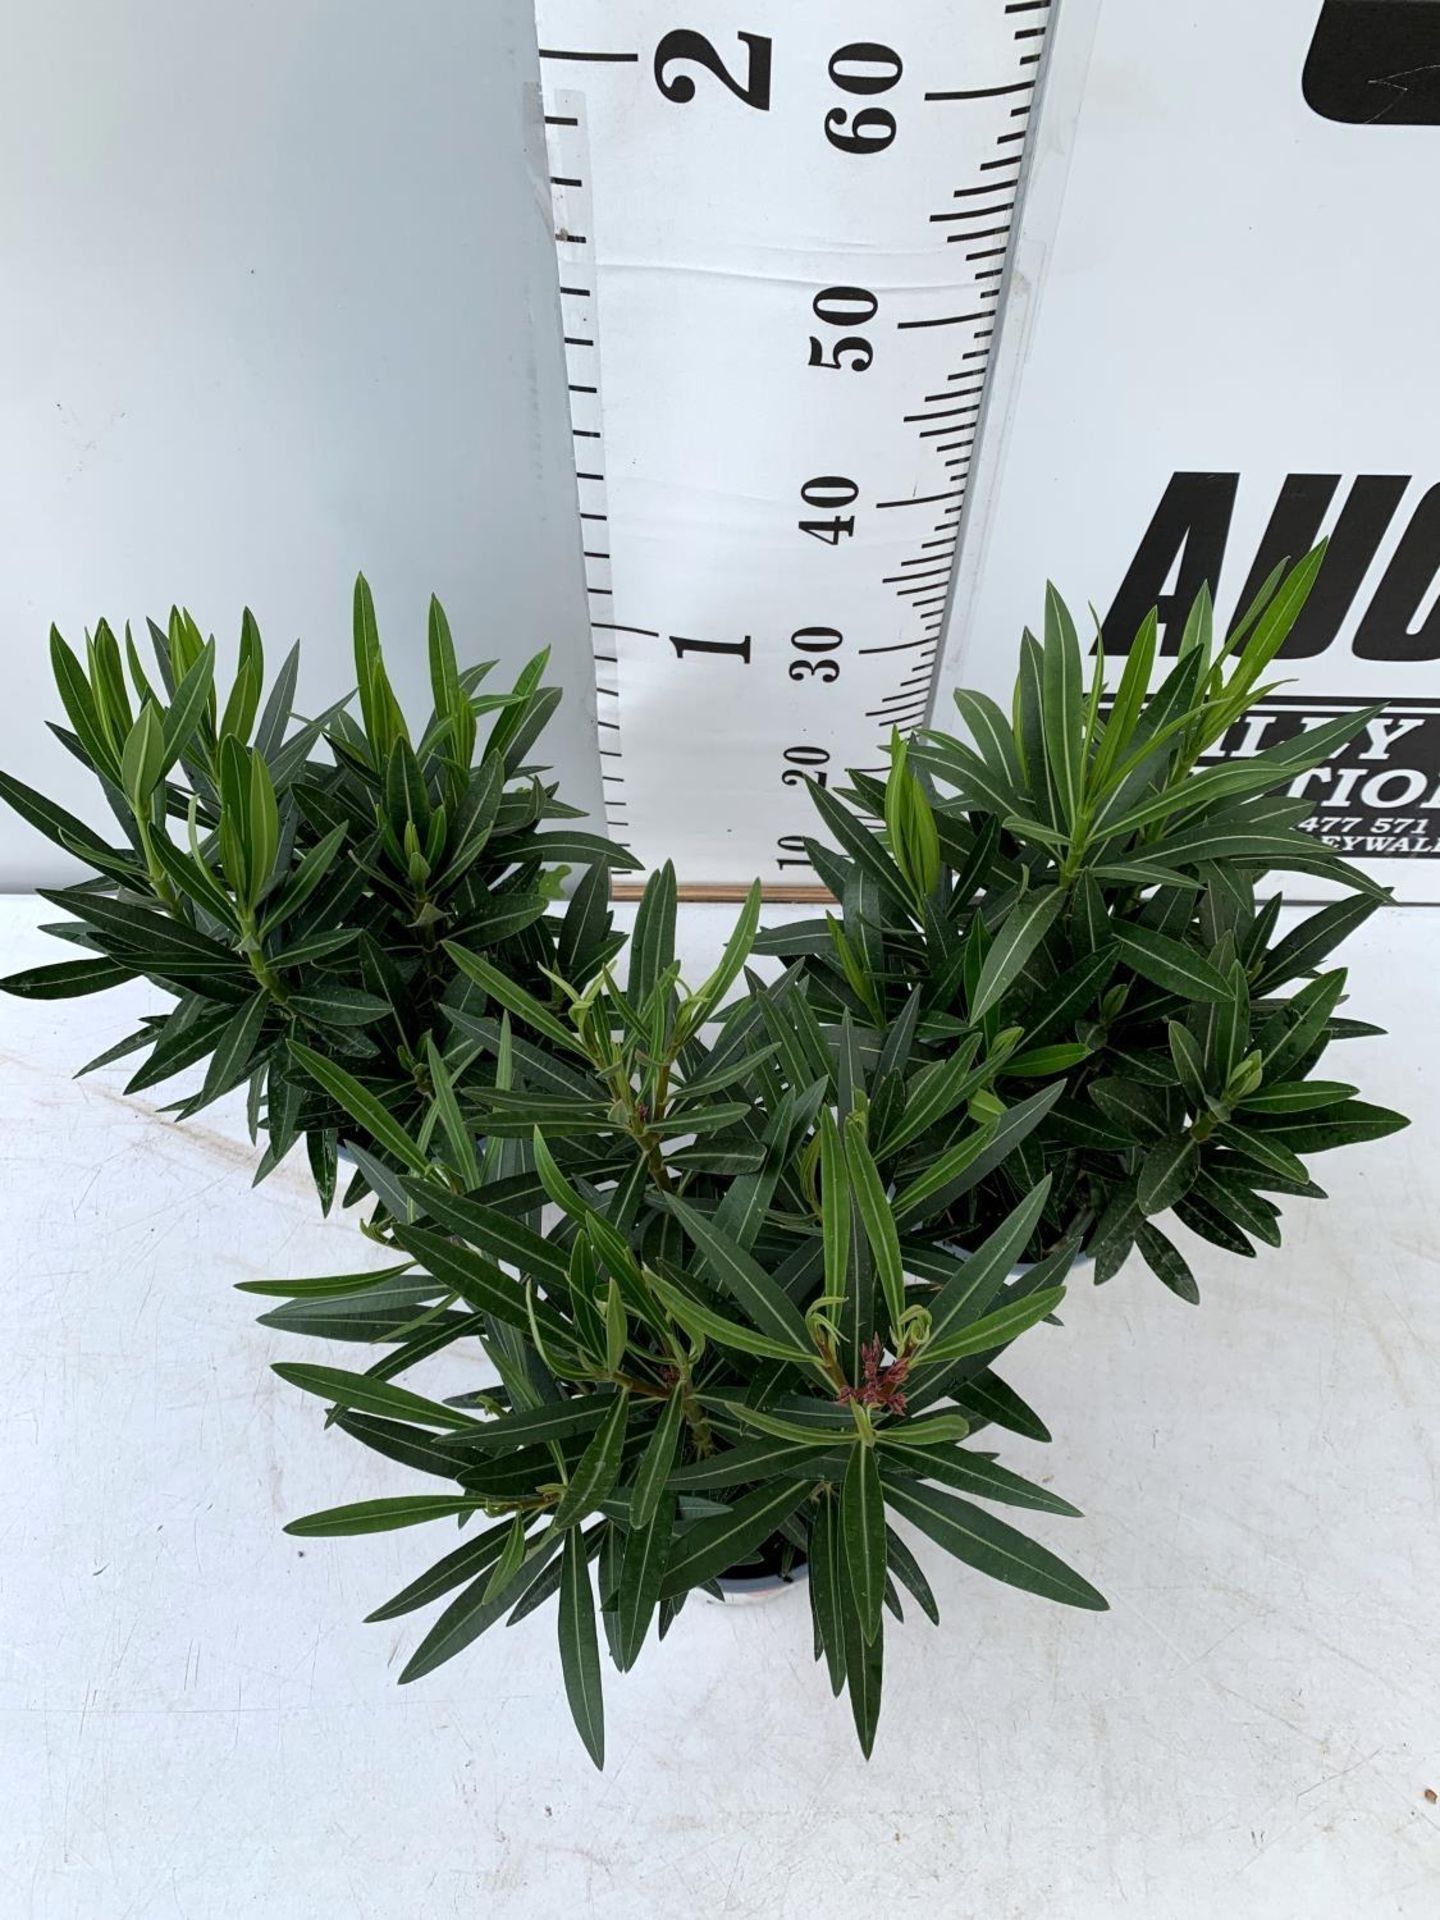 THREE MIXED OLEANDER NERIUM APPROX 55CM TALL IN 1 LTR POTS PLUS VAT TO BE SOLD FOR THE THREE - Image 4 of 6